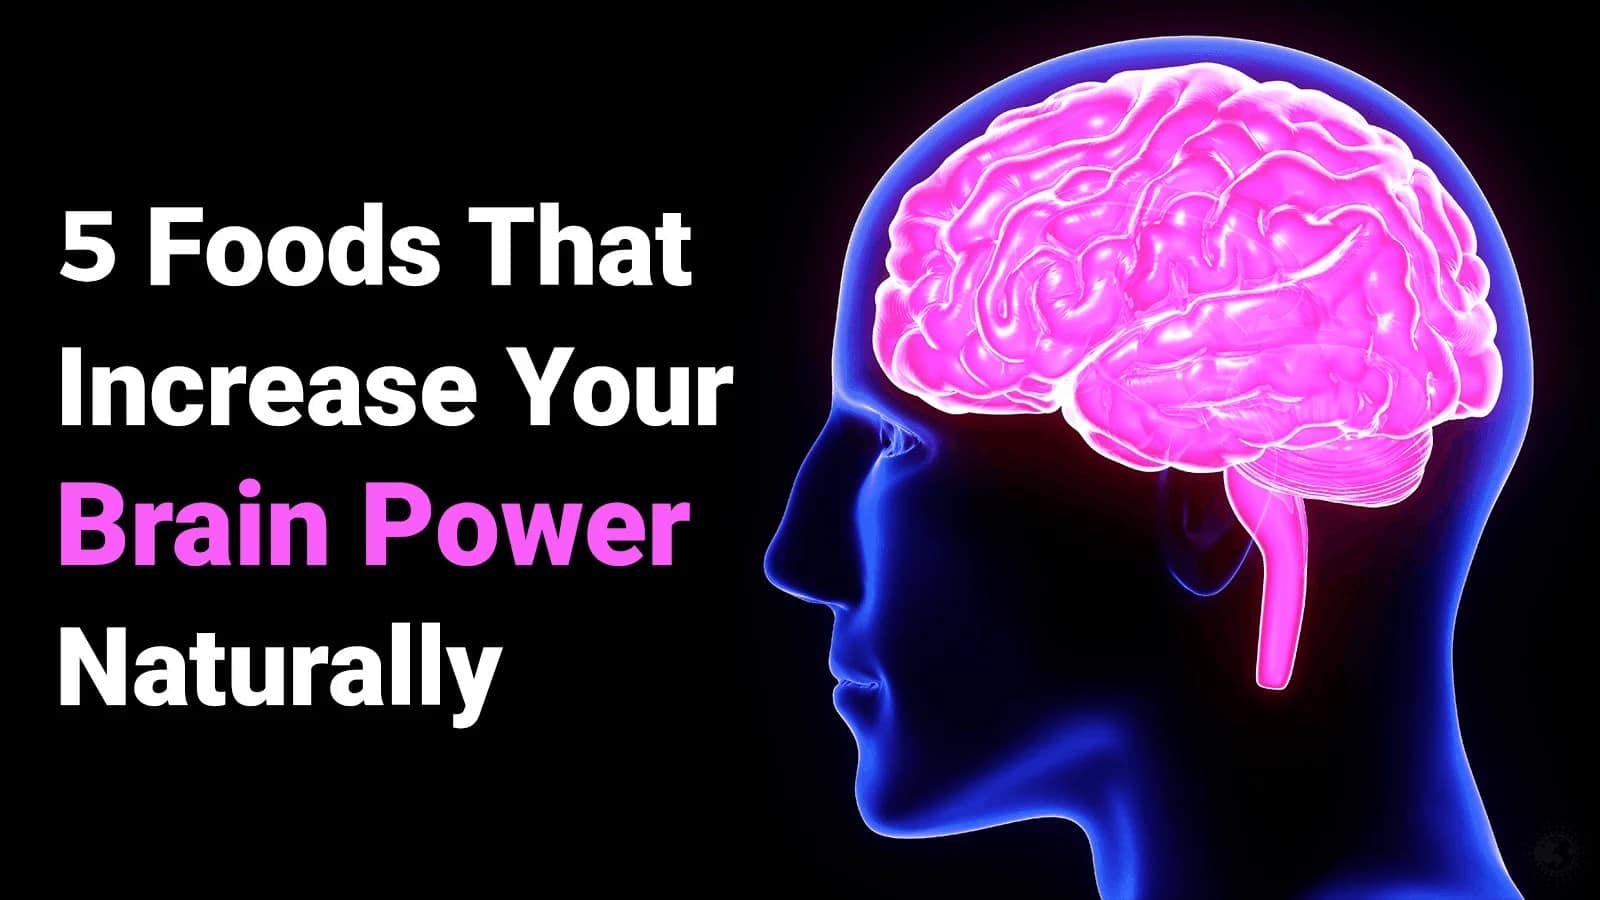 5 Foods That Increase Your Brain Power Naturally